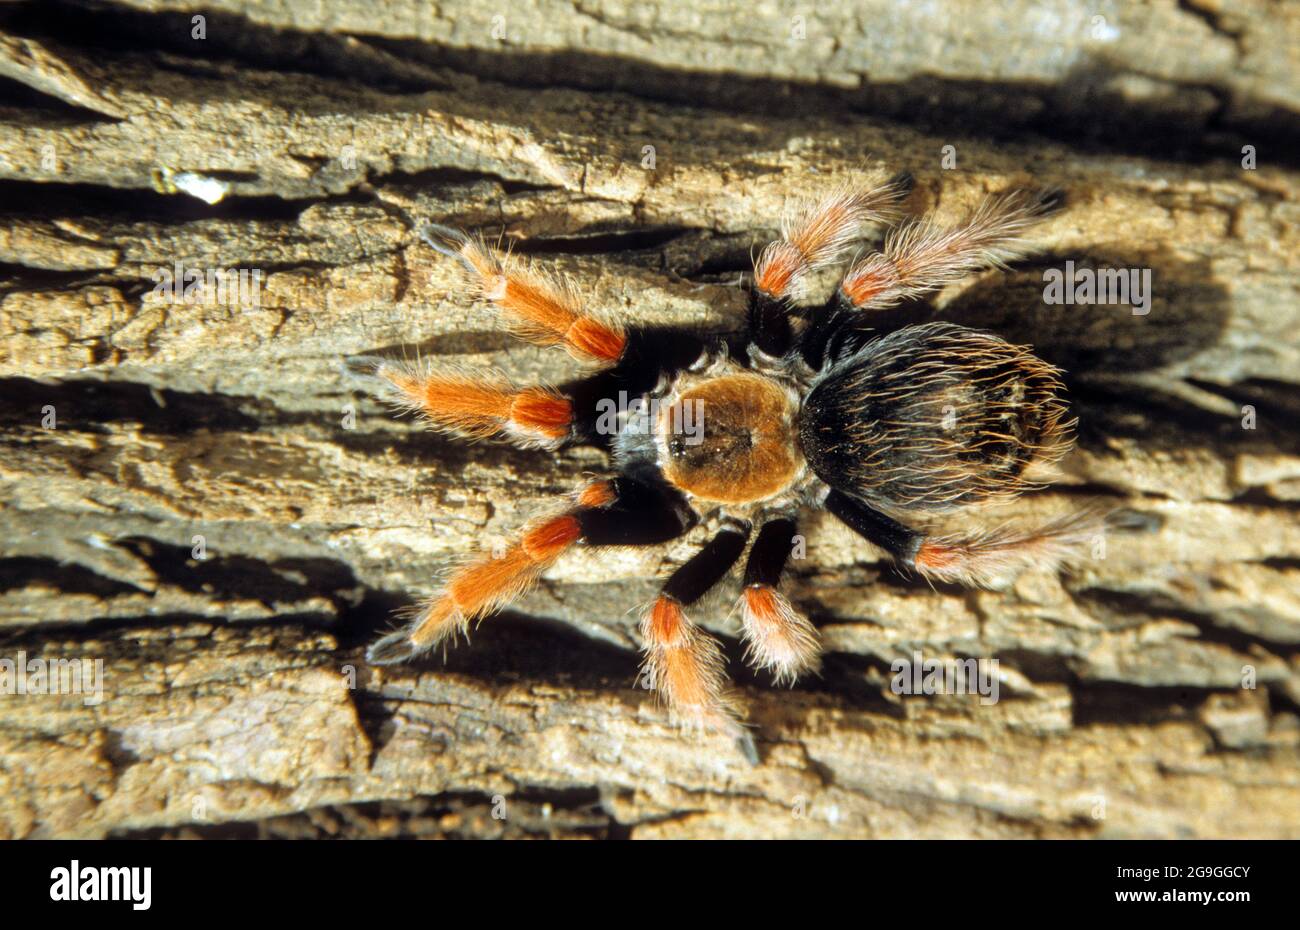 Mexican Red-kneed Tarantula (Brachypelma smithii), an endangered species from Central America and Mexico. Stock Photo